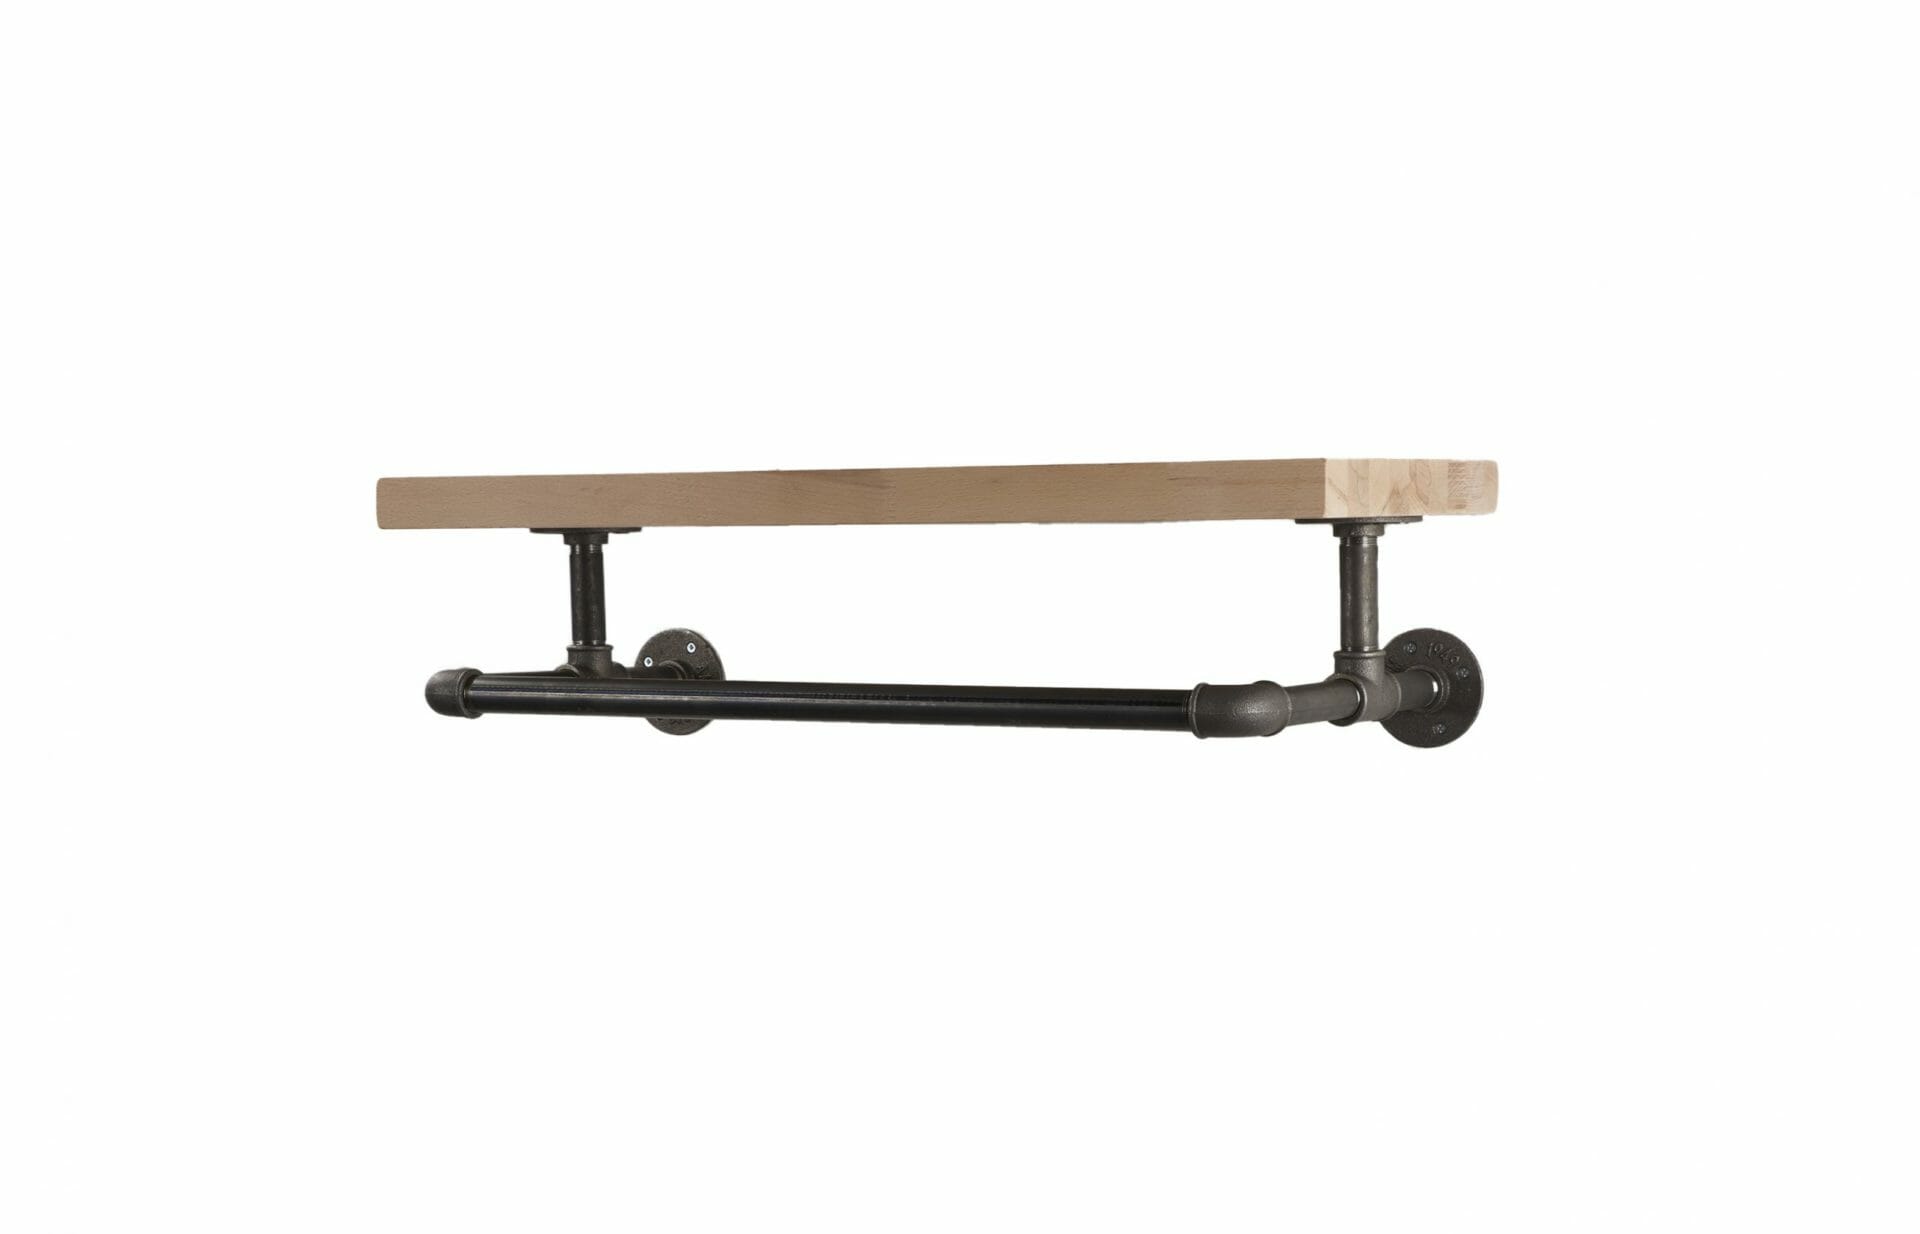 Solid Wooden Shelf with Pipe Bracket hanging rail